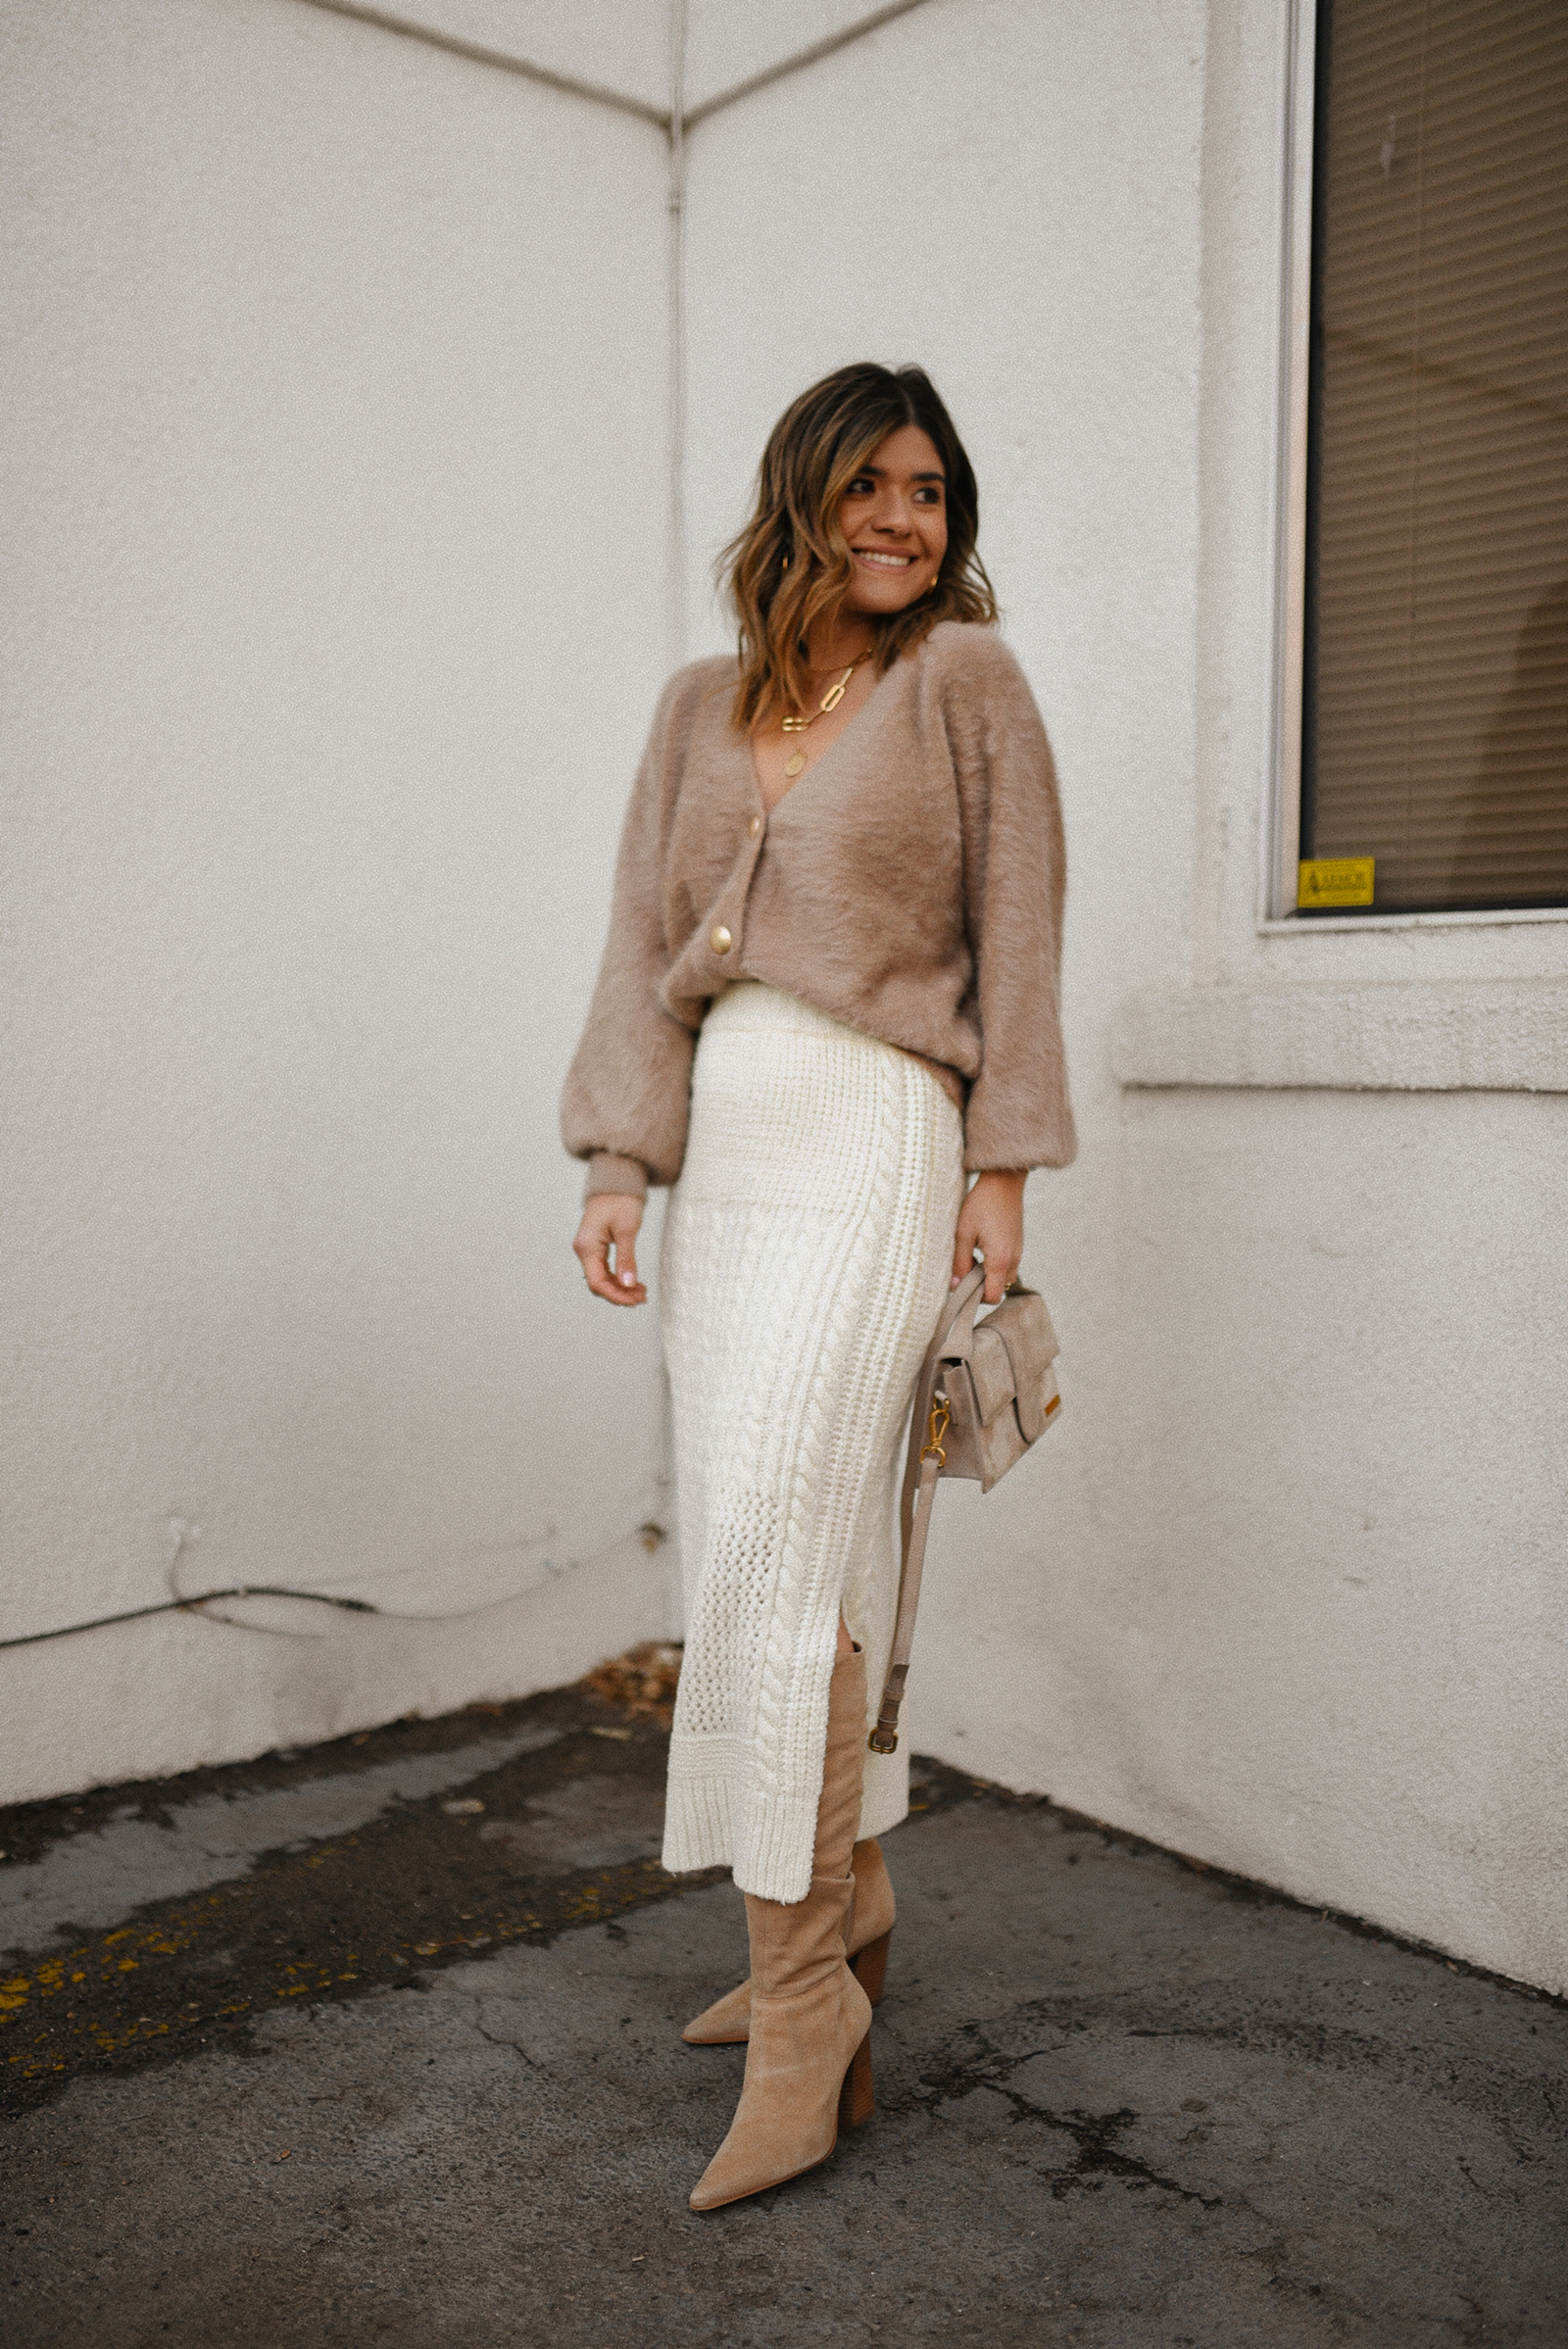 Carolina Hellal of Chic talk wearing a brown fuzzy sweater via Petal + Pup, Knit midi skirt via Anthropologie, Vince Camuto tall suede boots and Jacquemus le bambino bag. 